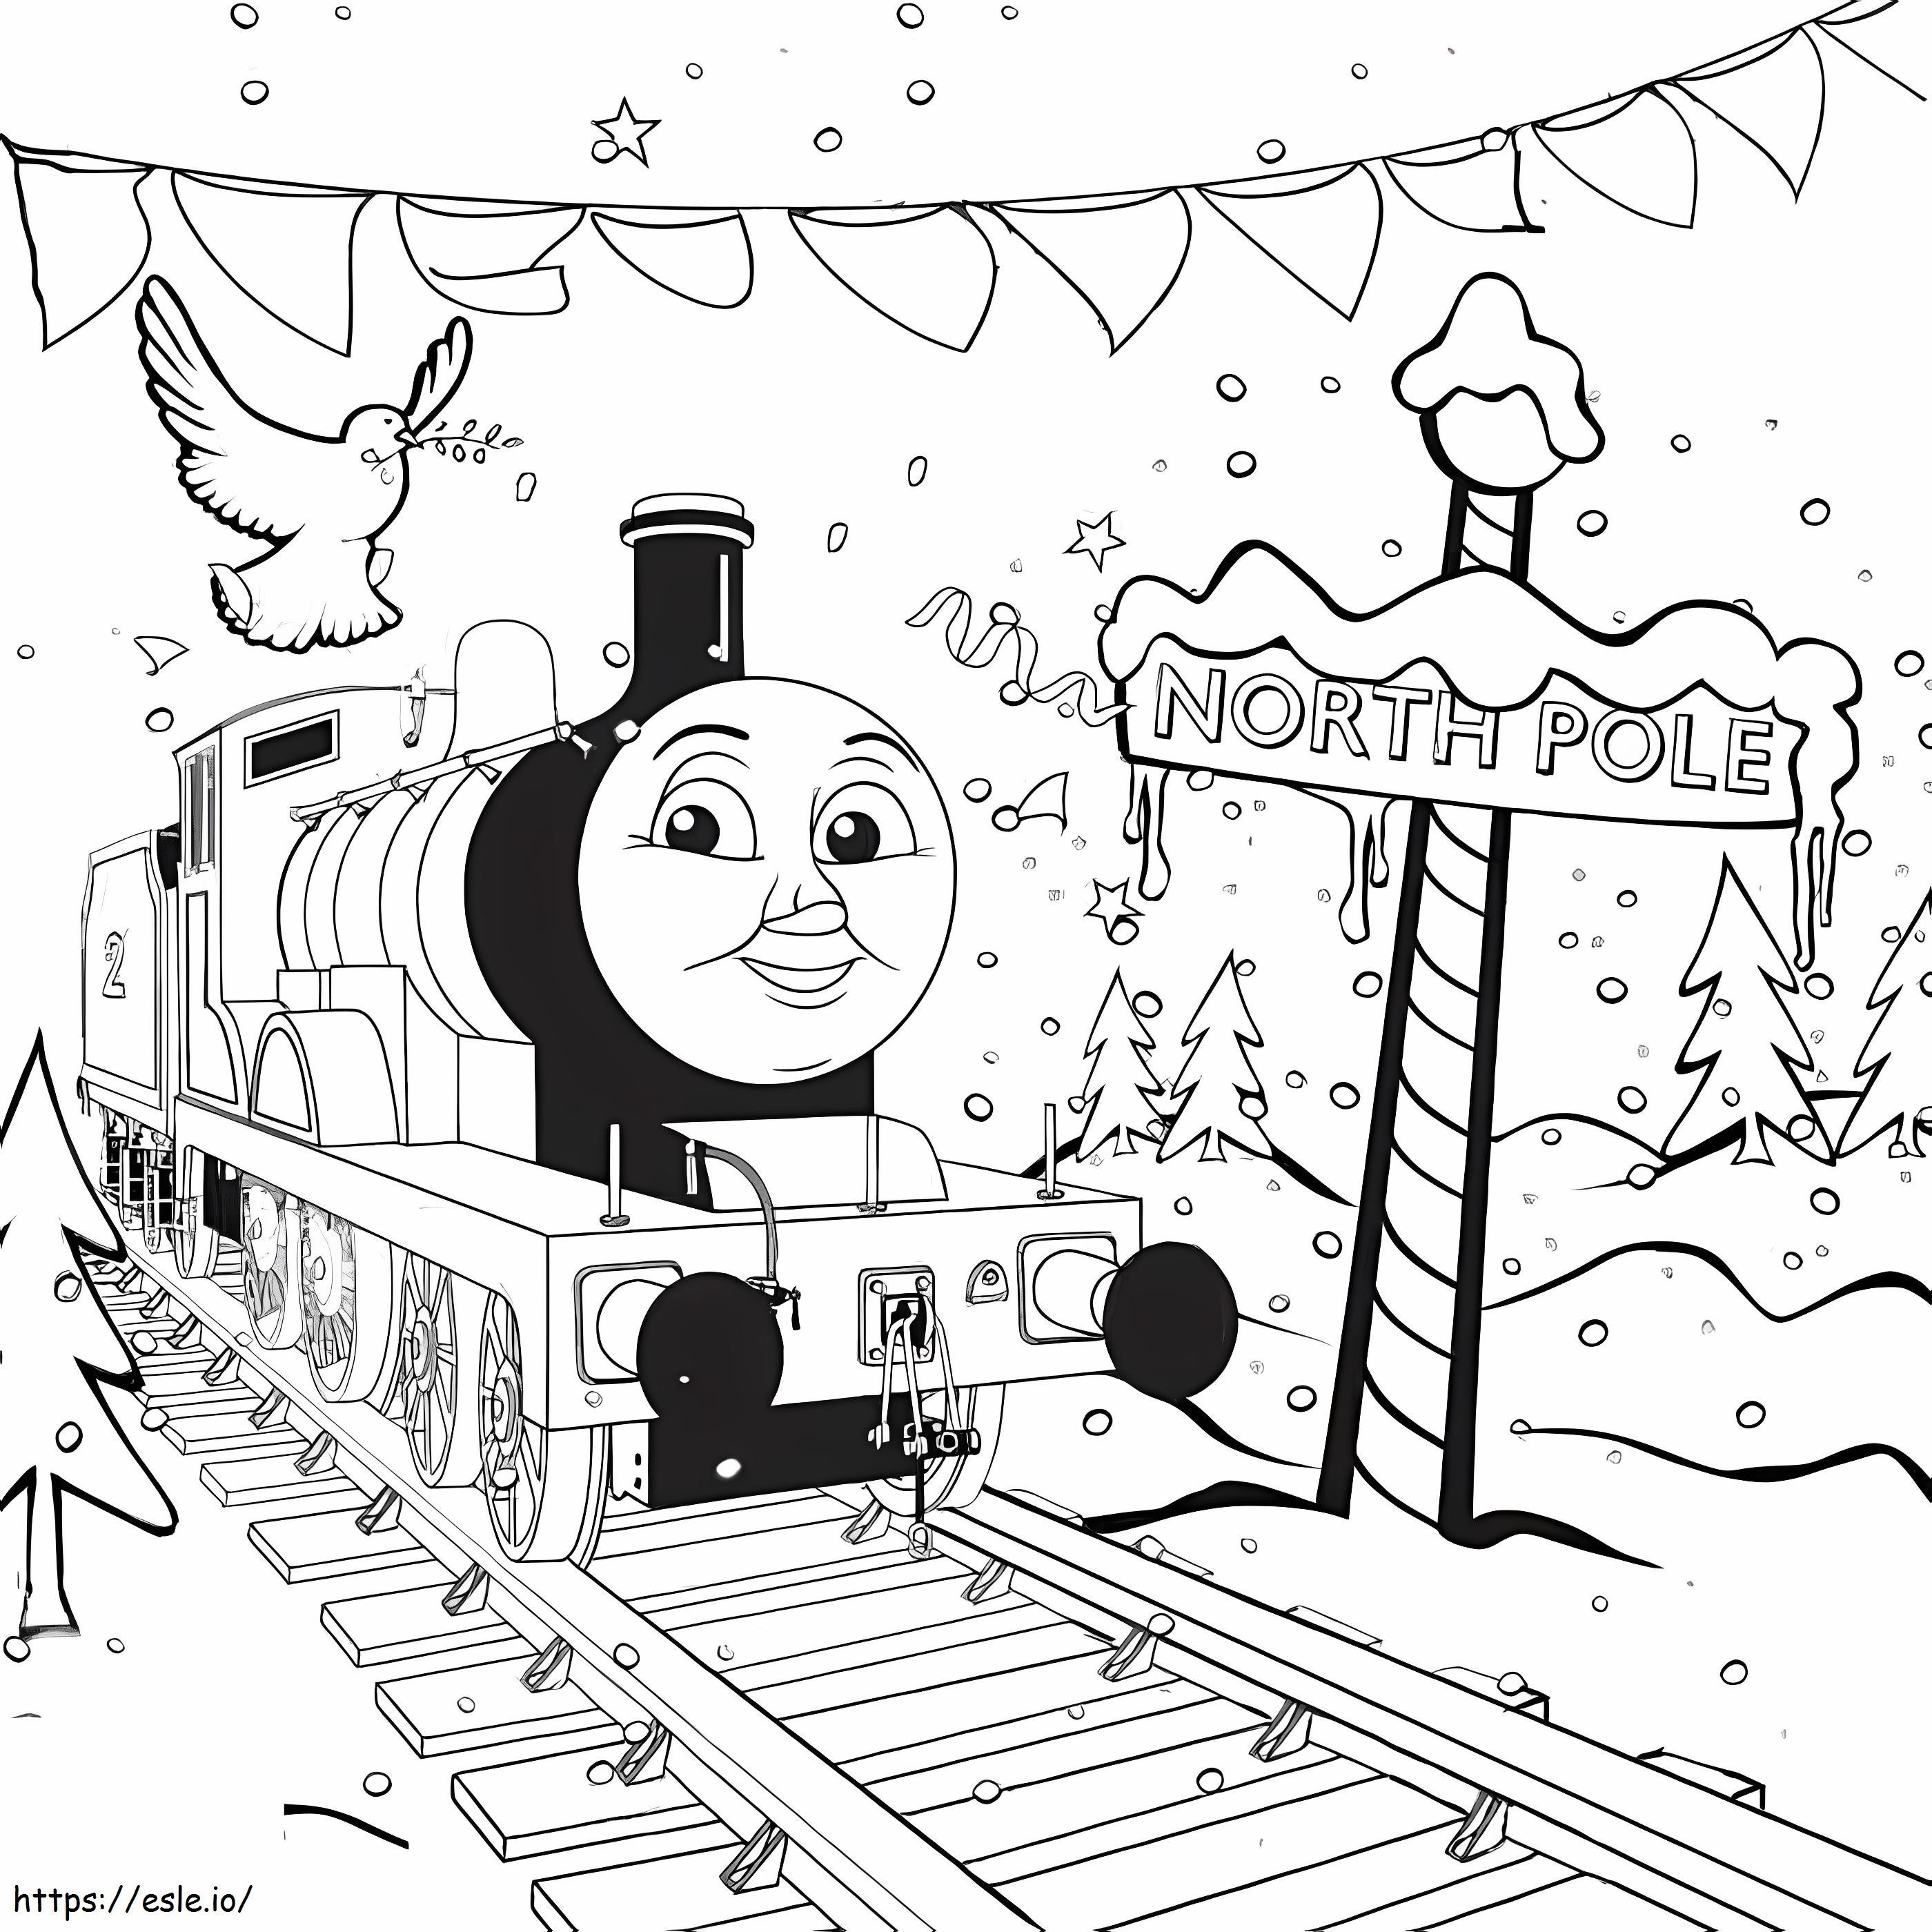 Thomas The Train Coloring Page 9 coloring page